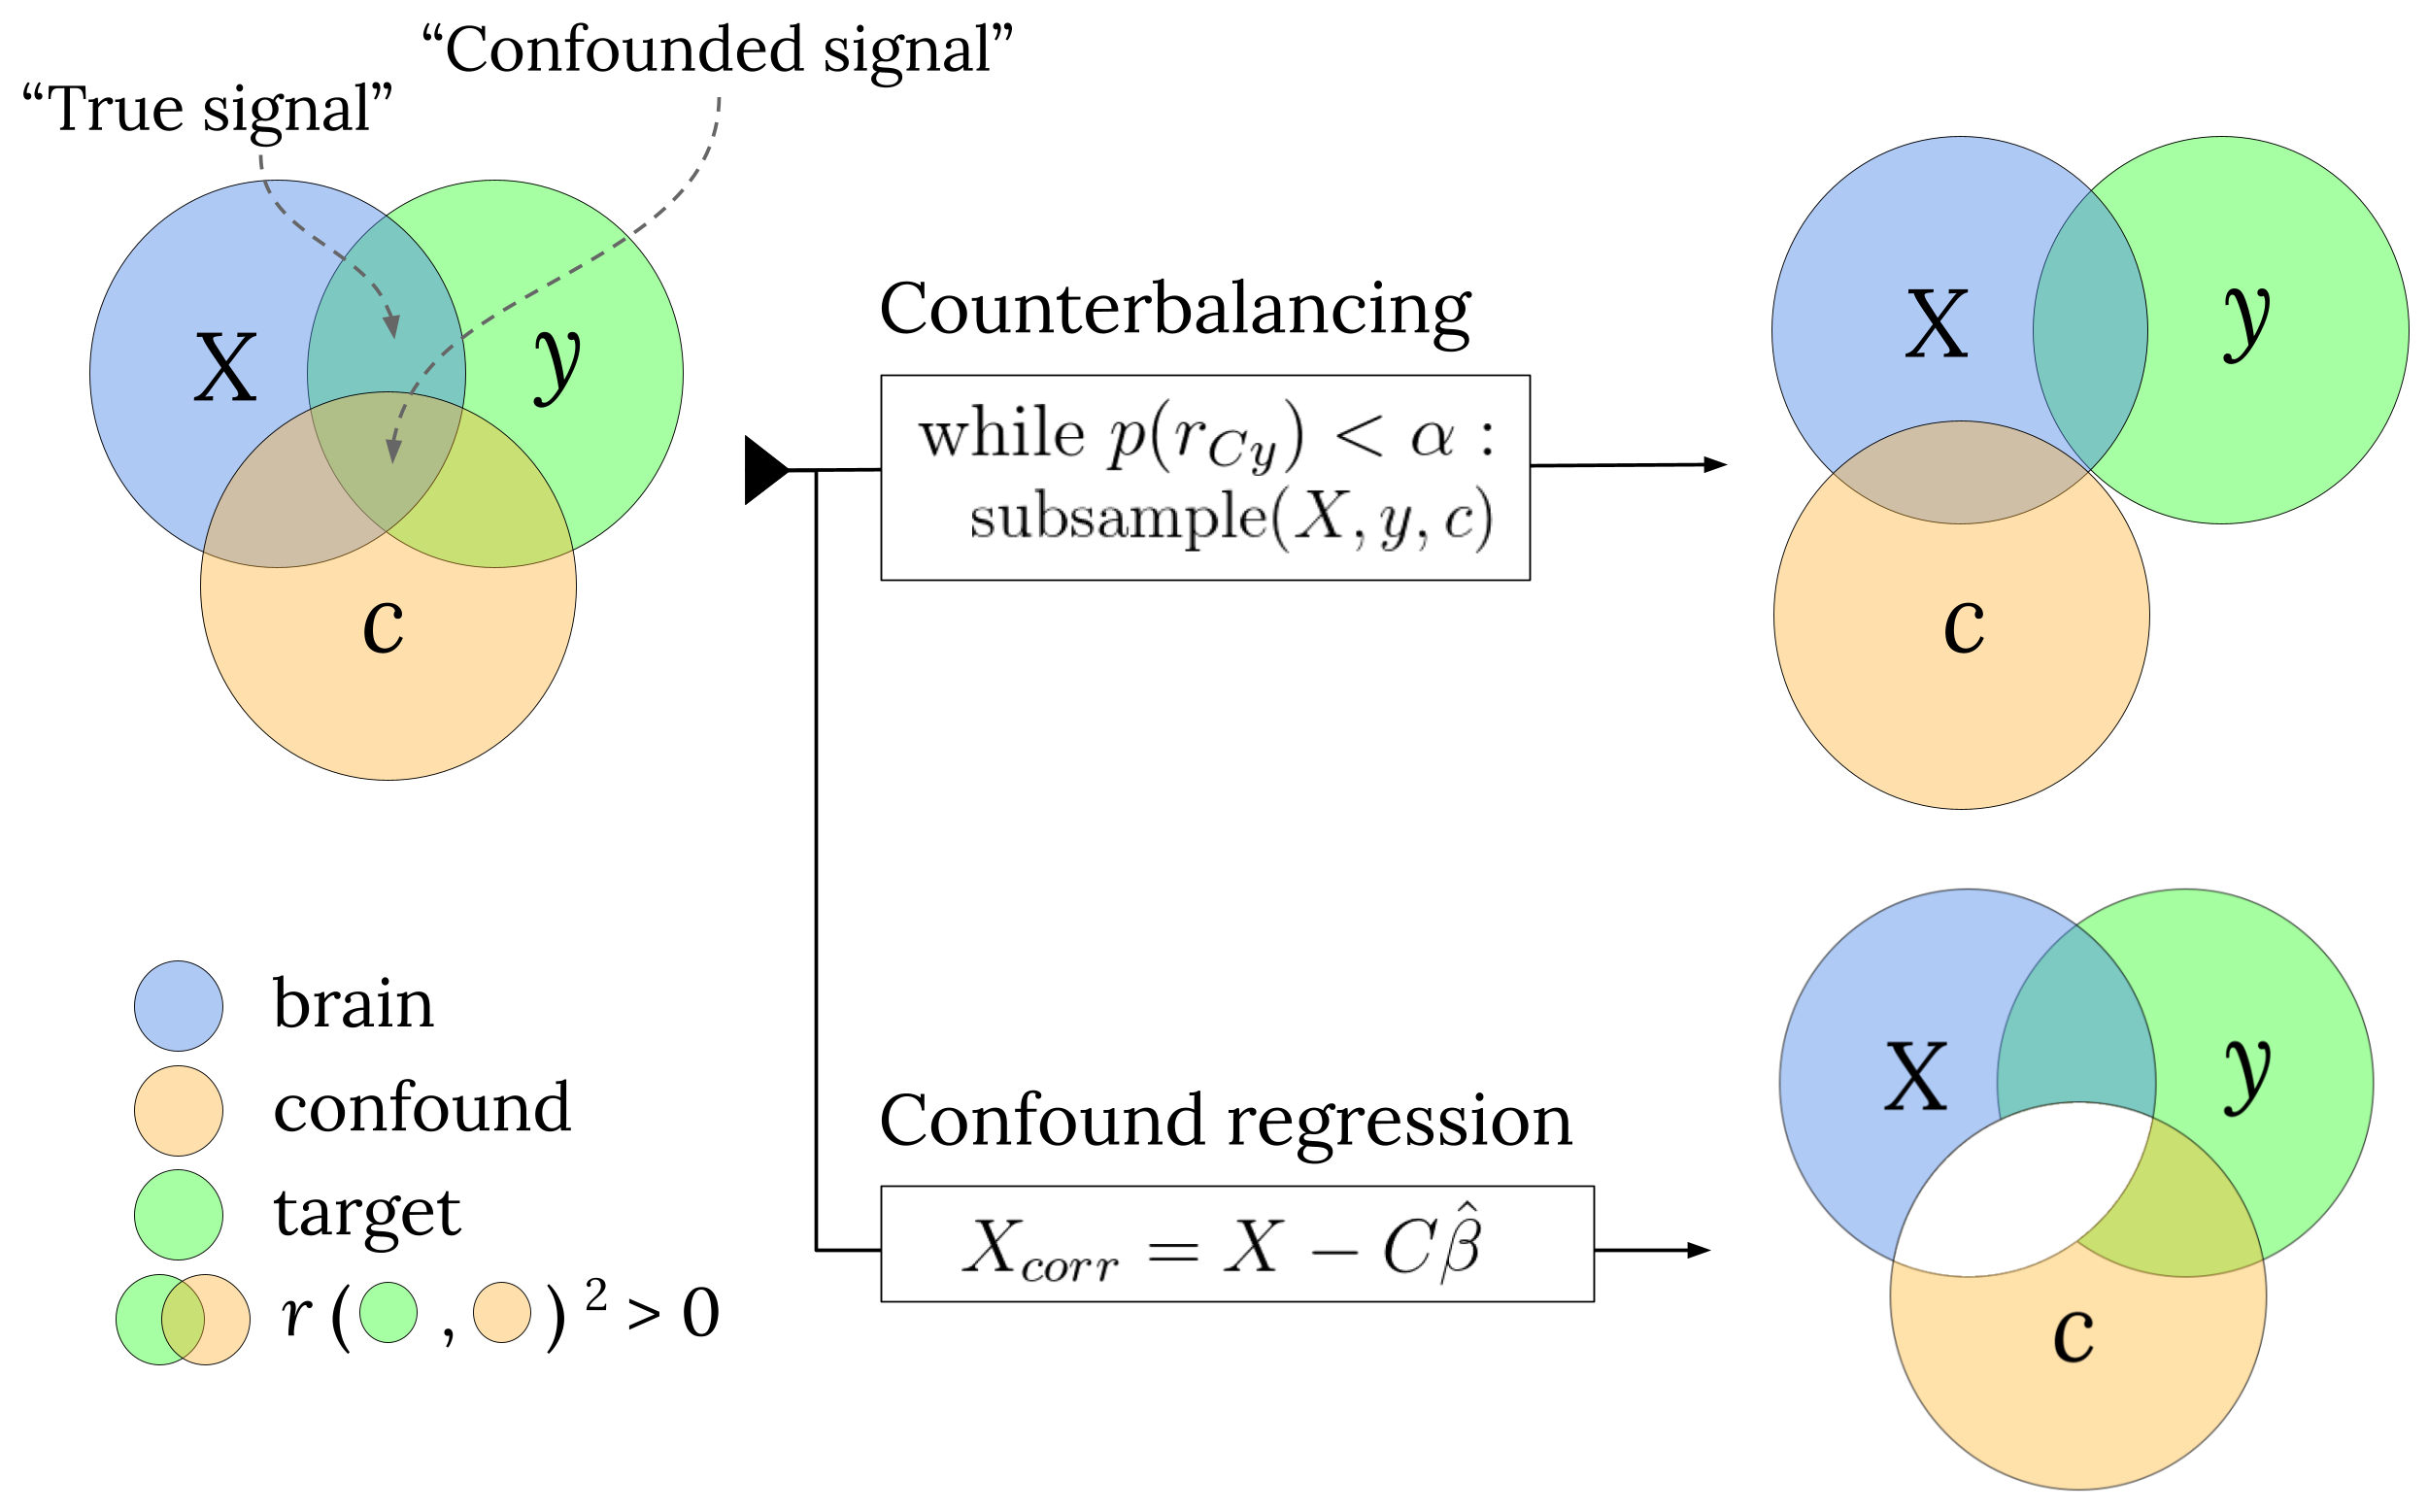 A schematic visualization how the main two confound control methods evaluated in this article deal with the “confounded signal”, making sure decoding models only capitalize on the “true signal”.